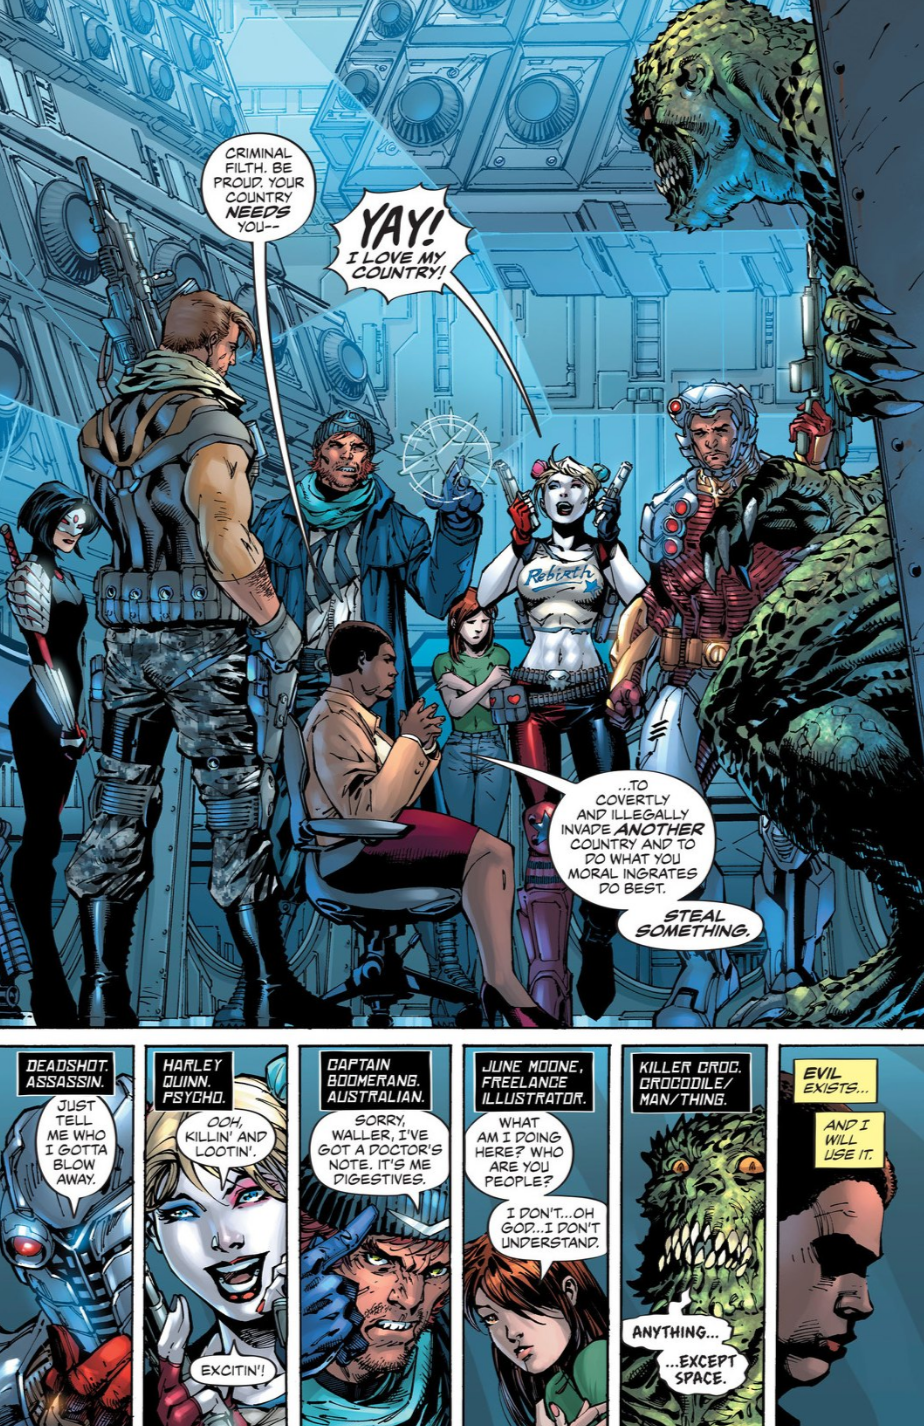 The Best Suicide Squad Story In Comics Isn’t Being Published By DC